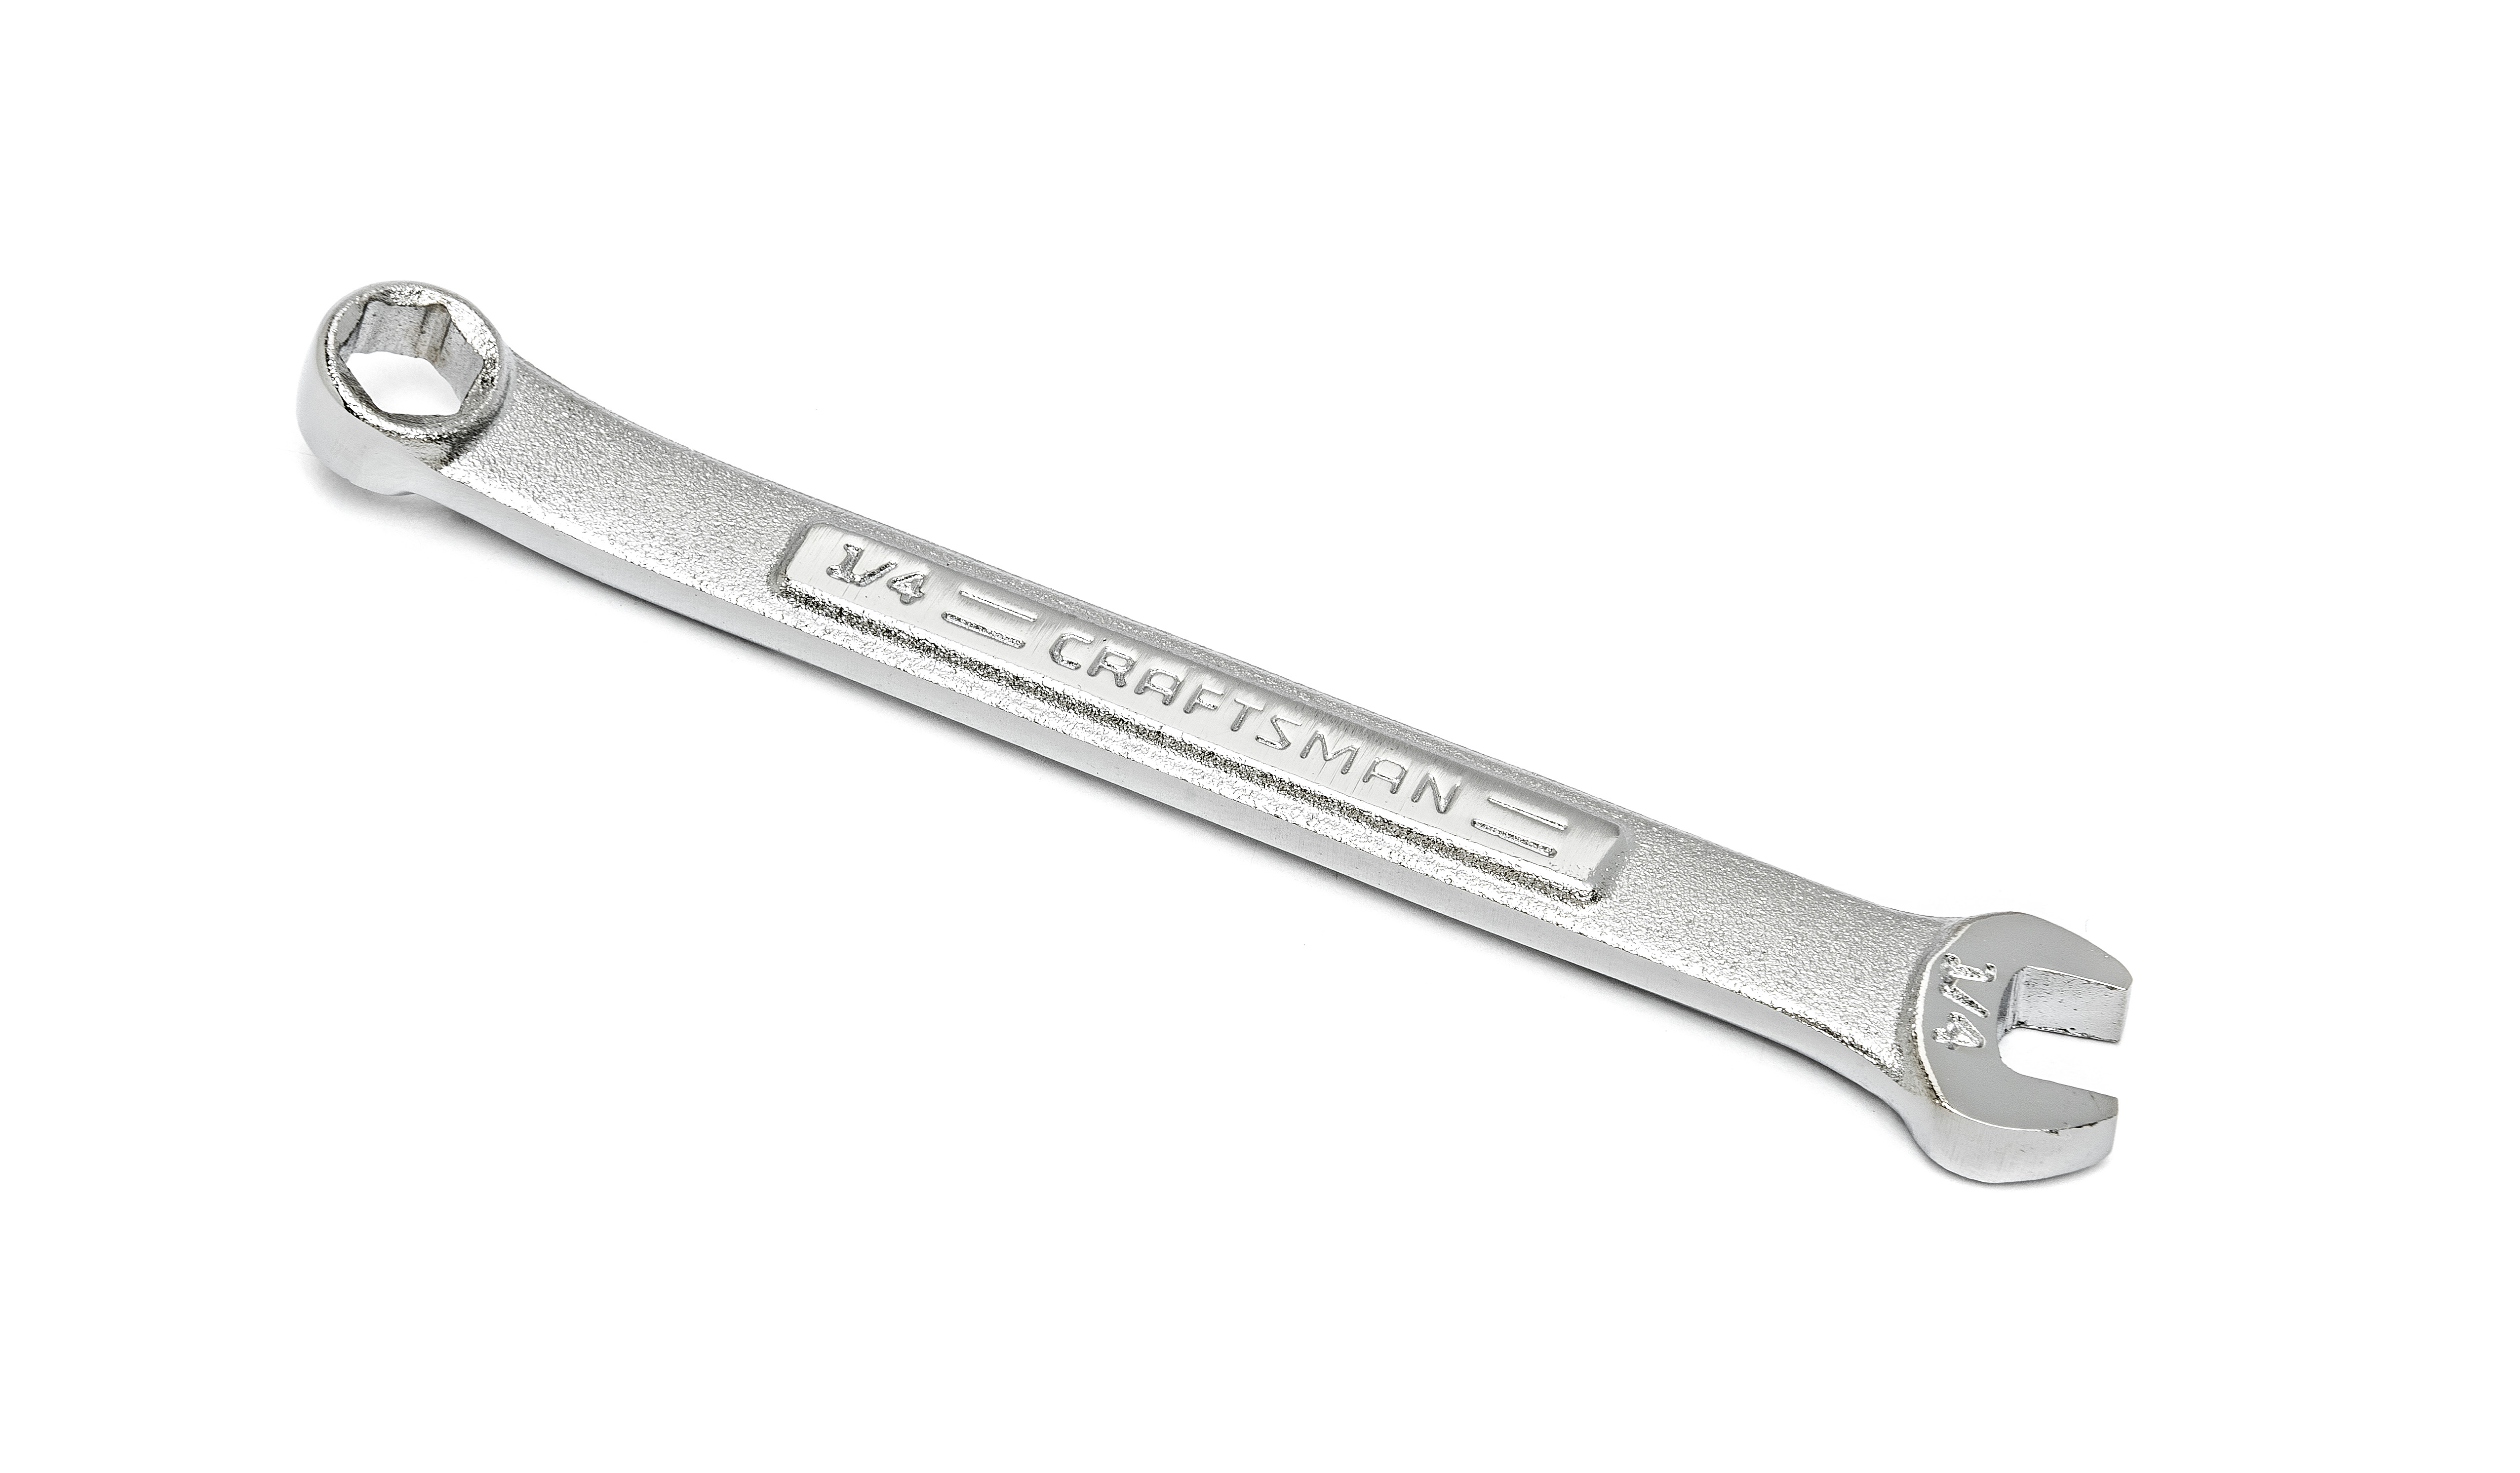 Craftsman 1/4"x1/4" 6 Point Alloy Steel Combination Wrench SAE 00944381 Made USA